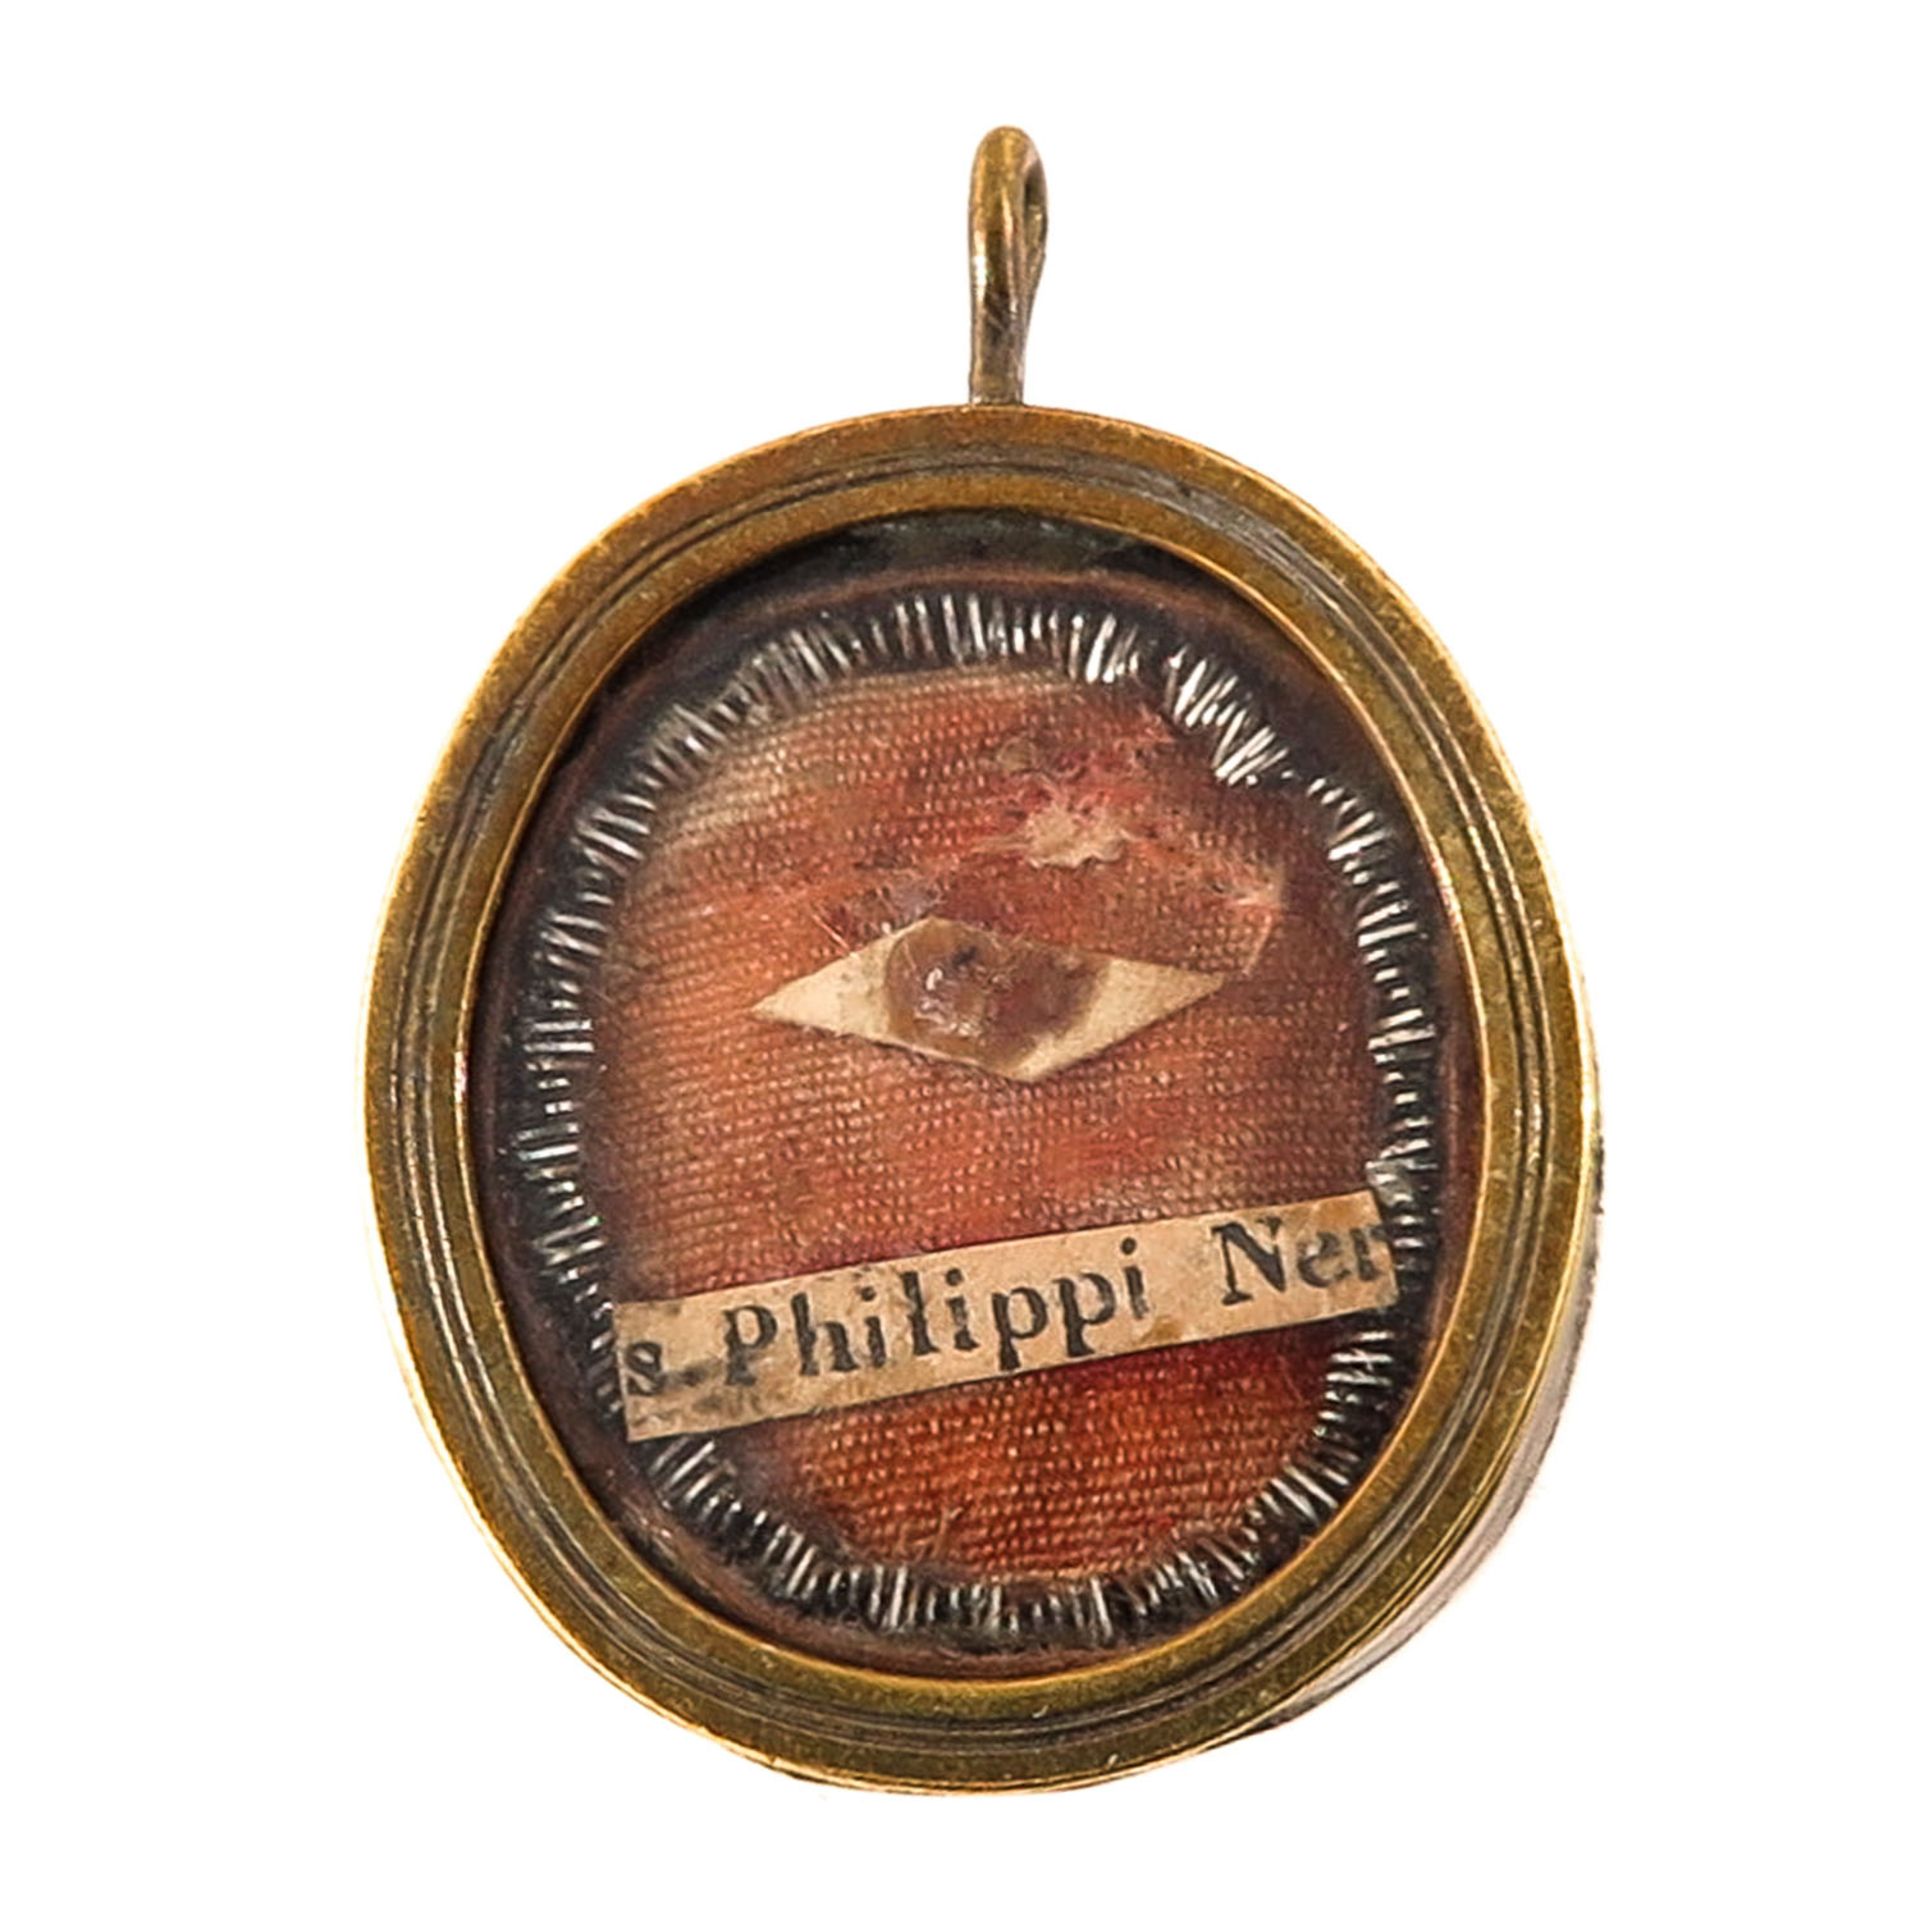 A Relic Holder with Relic of Saint Philip Neri with Certificate